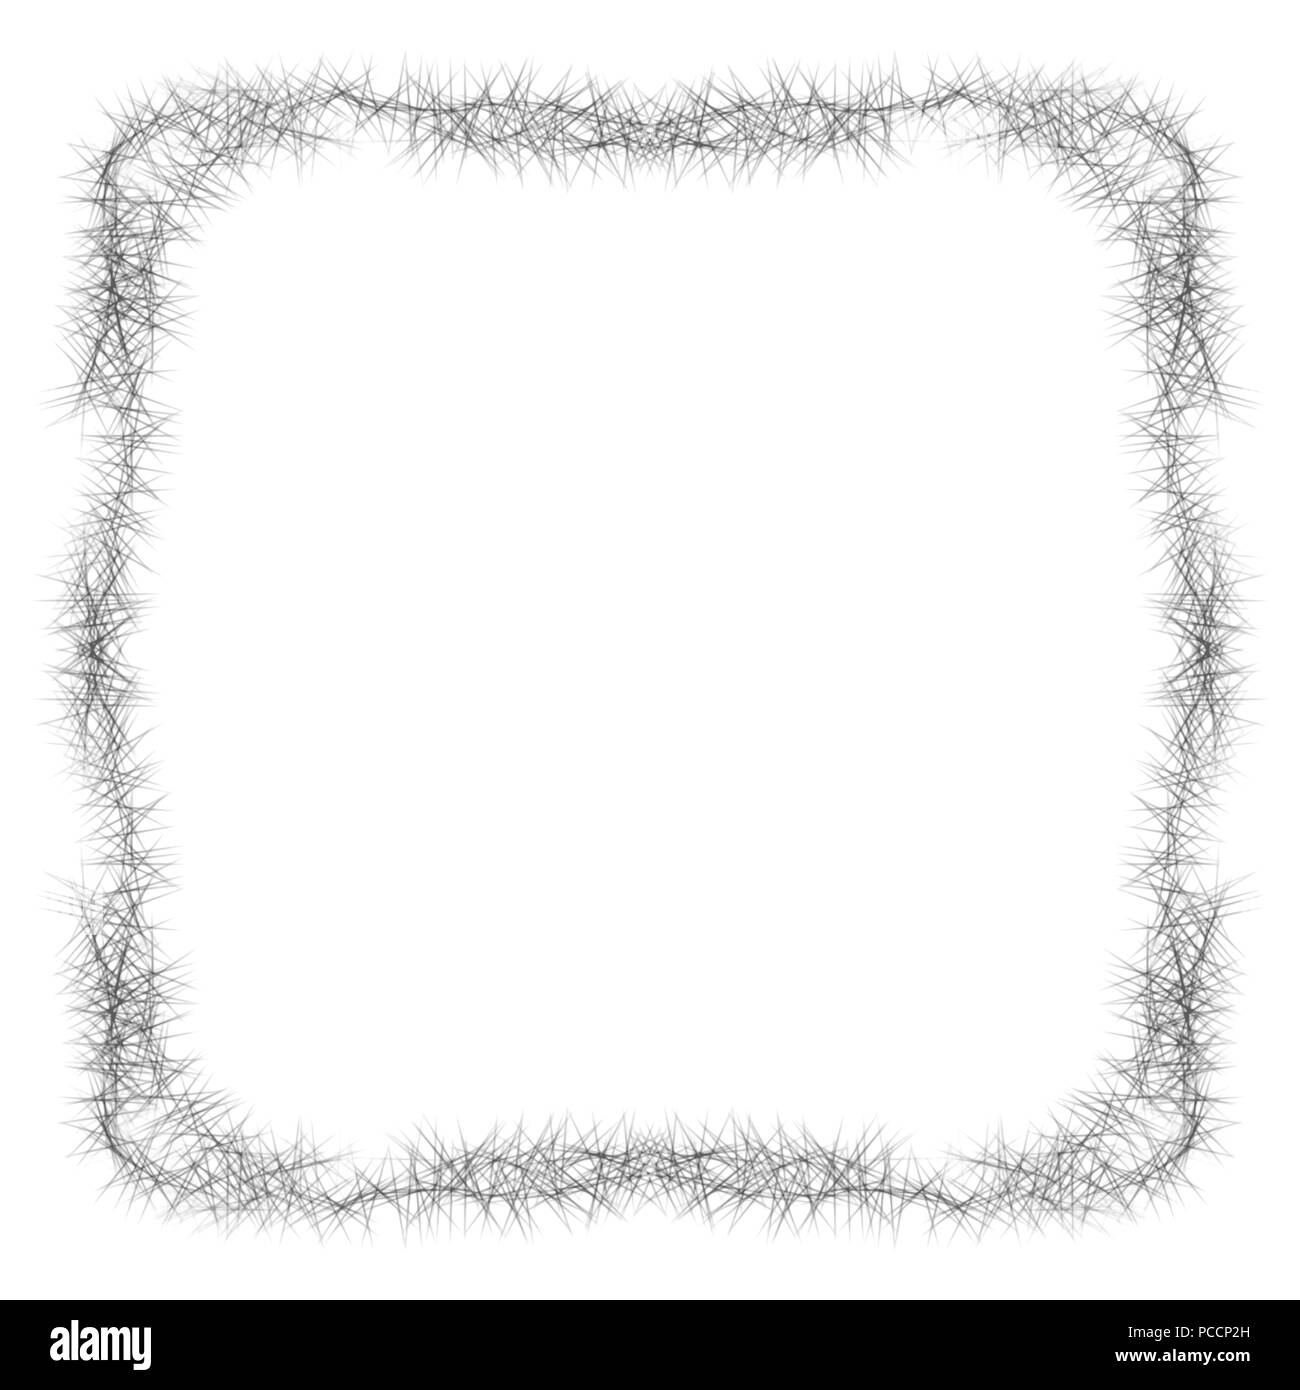 grey wire fence watercolor frame border pattern, vector illustration Stock Vector